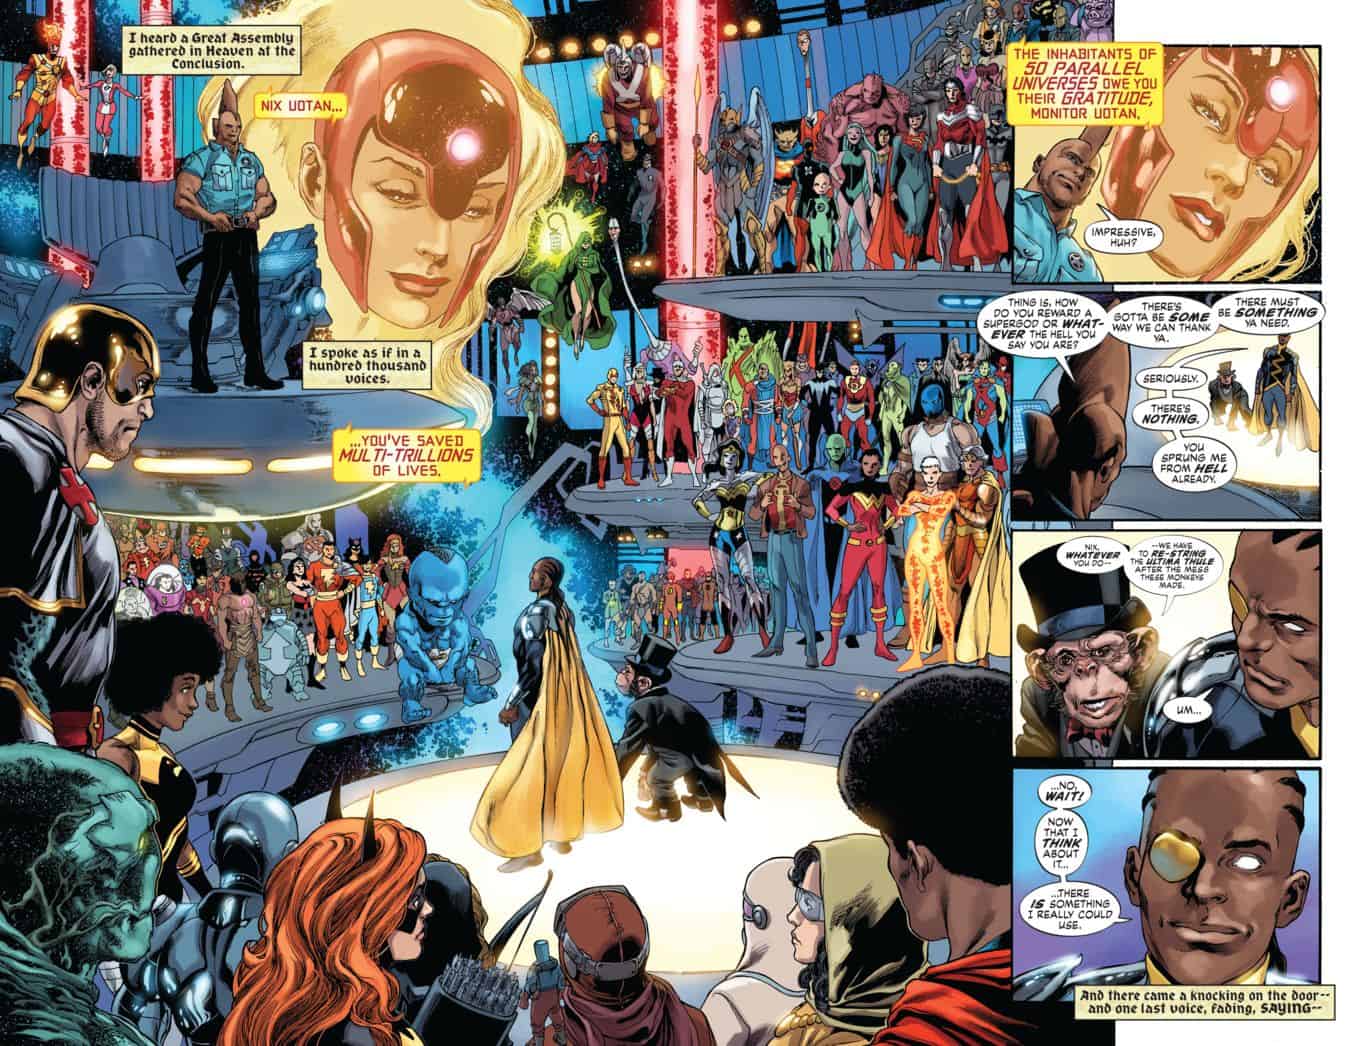 Dc Comics Spoilers And Reviews Convergence 4 The Multiversity 2 And Convergence Booster Gold 1